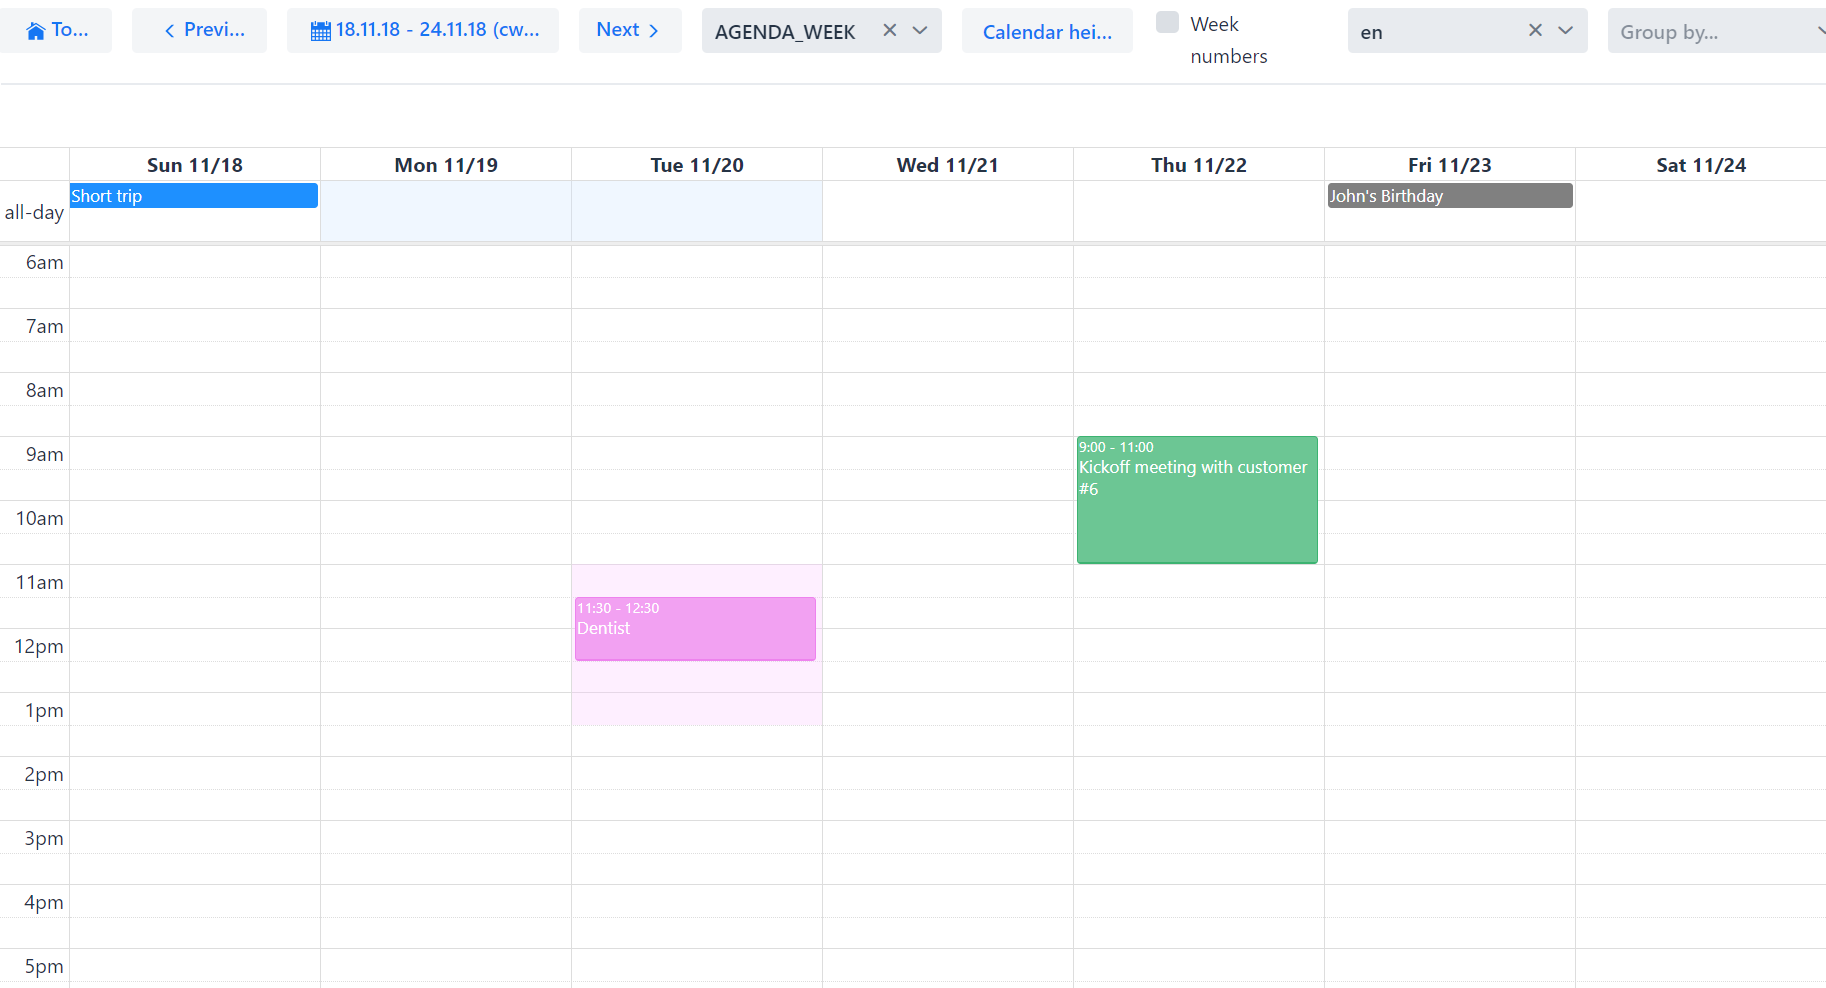 Weekly agenda view with background events